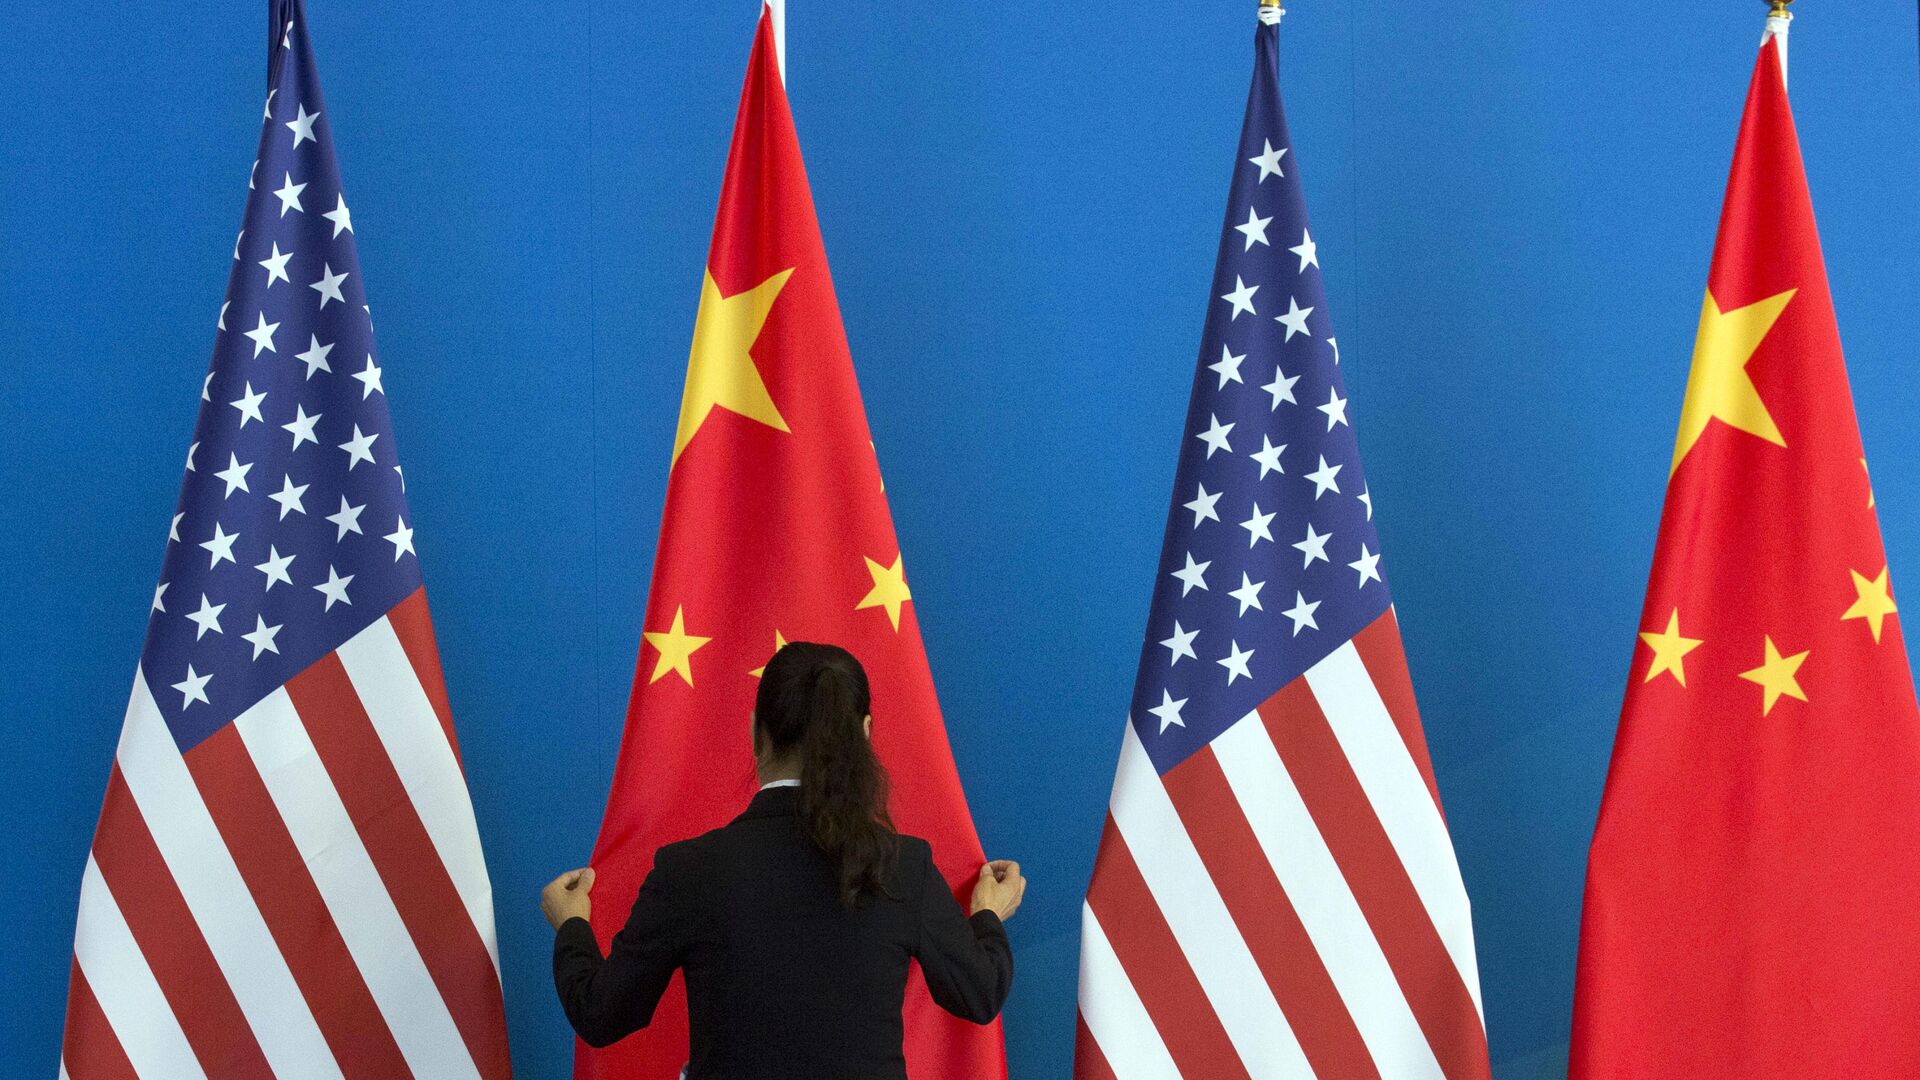 A Chinese woman adjusts the Chinese national flag near U.S. national flags before a Strategic Dialogue expanded meeting that's part of the U.S.-China Strategic and Economic Dialogue at the Diaoyutai State Guesthouse in Beijing, Thursday, July 10, 2014 - Sputnik International, 1920, 11.06.2021